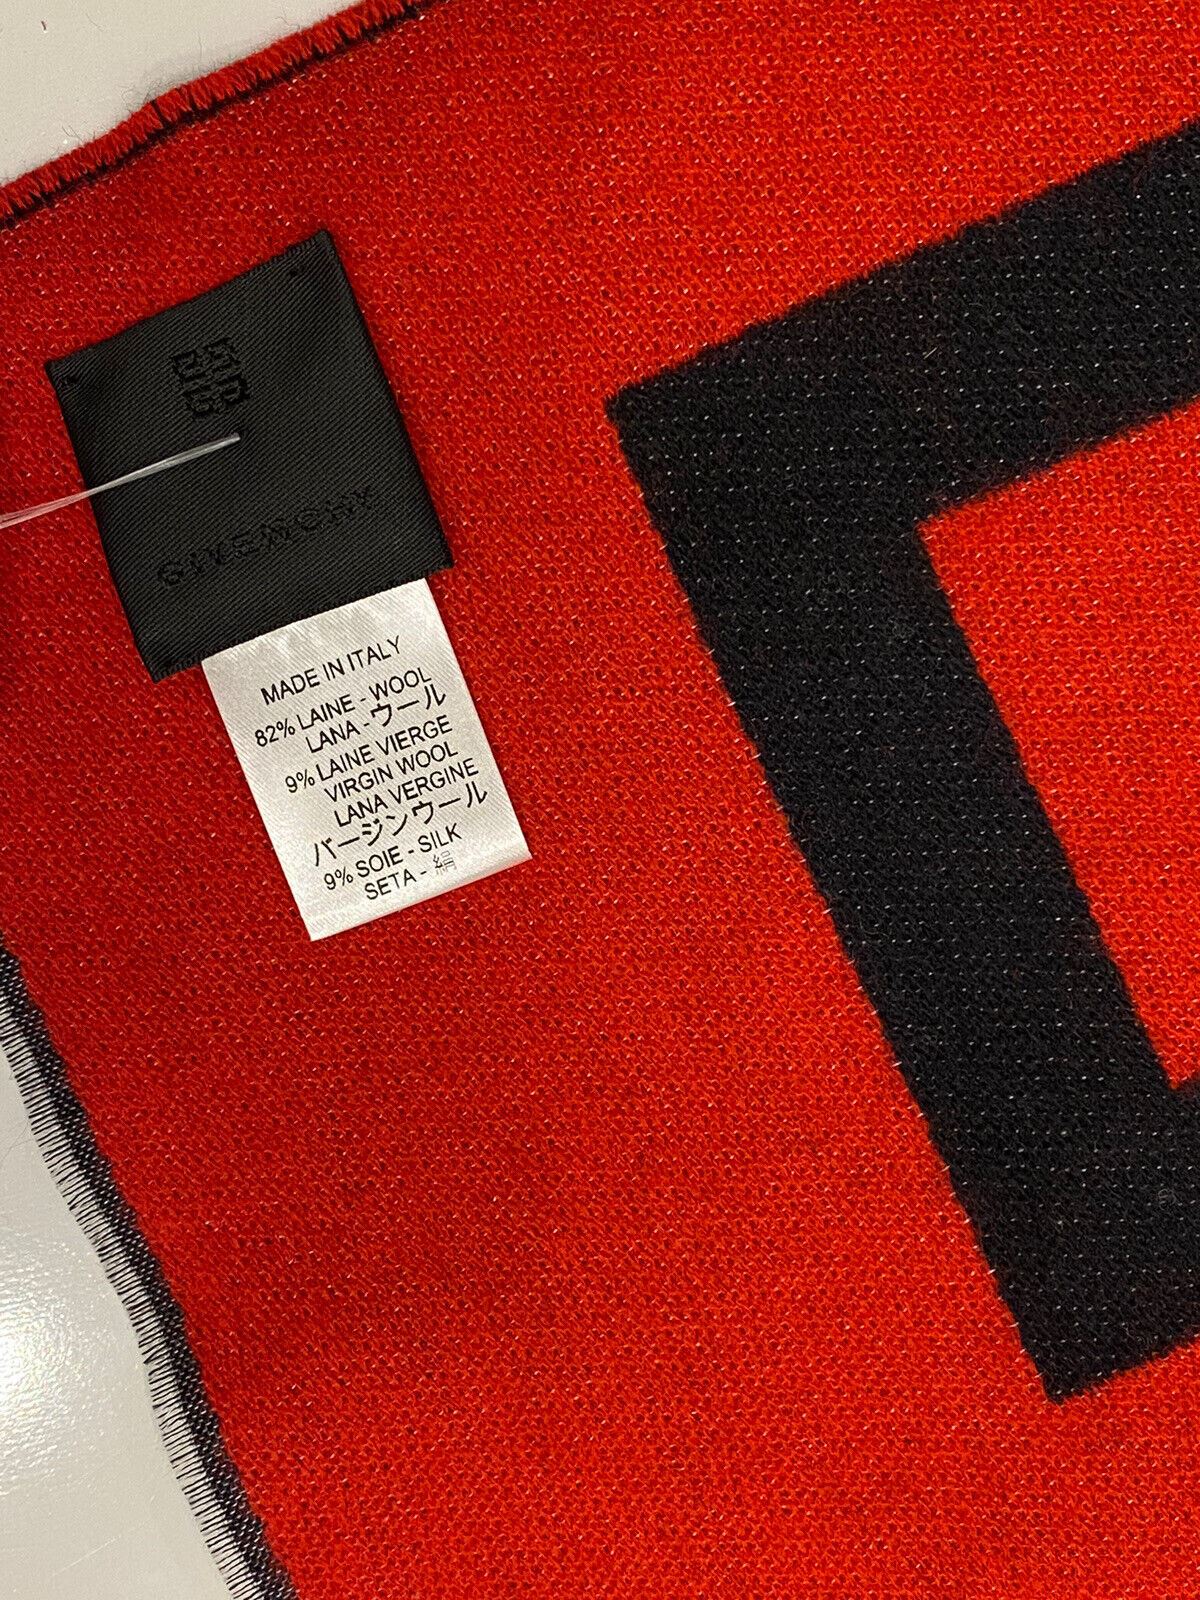 NWT $400 Givenchy Logo Reversible Wool Blend Black/Red Scarf 14"W x 70"L Italy